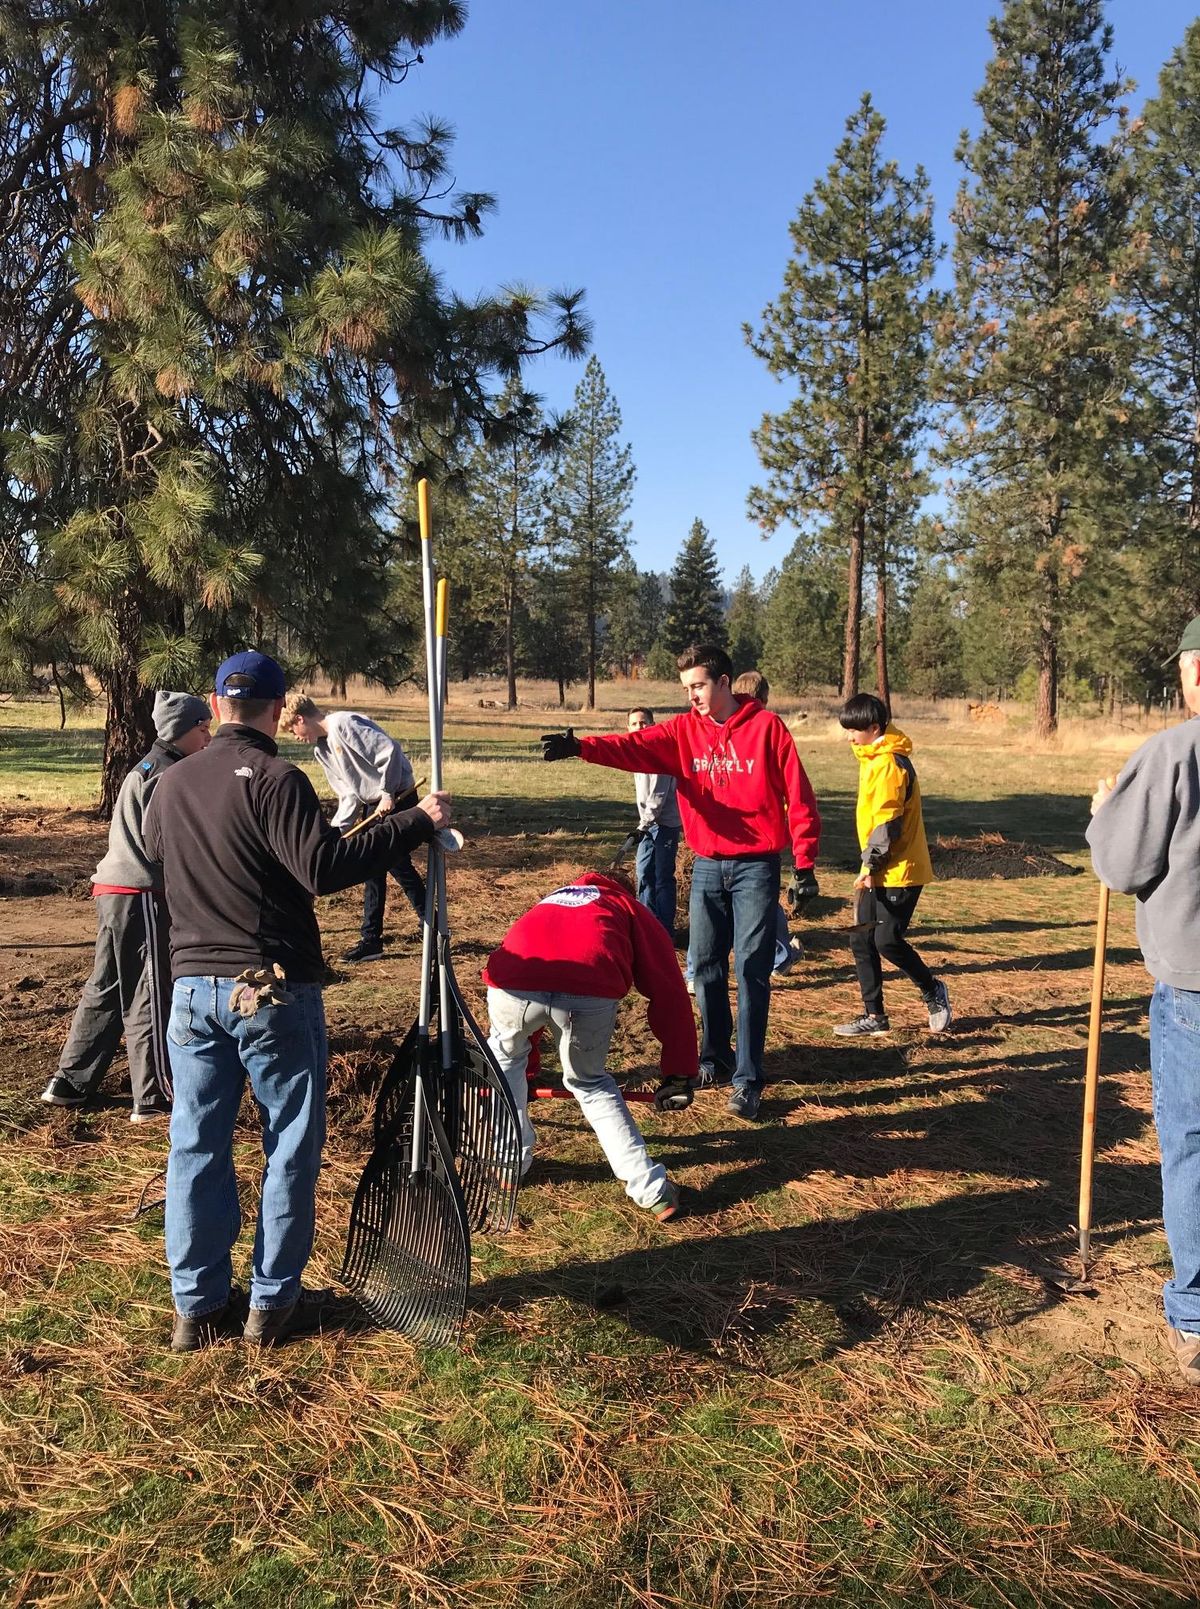 Brandon Brewer supervises volunteers during his Eagle Scout project at River’s Wish Animal Sanctuary in northwest Spokane. The group built a tool shed for the animal shelter. (Brandon Brewer / Courtesy)